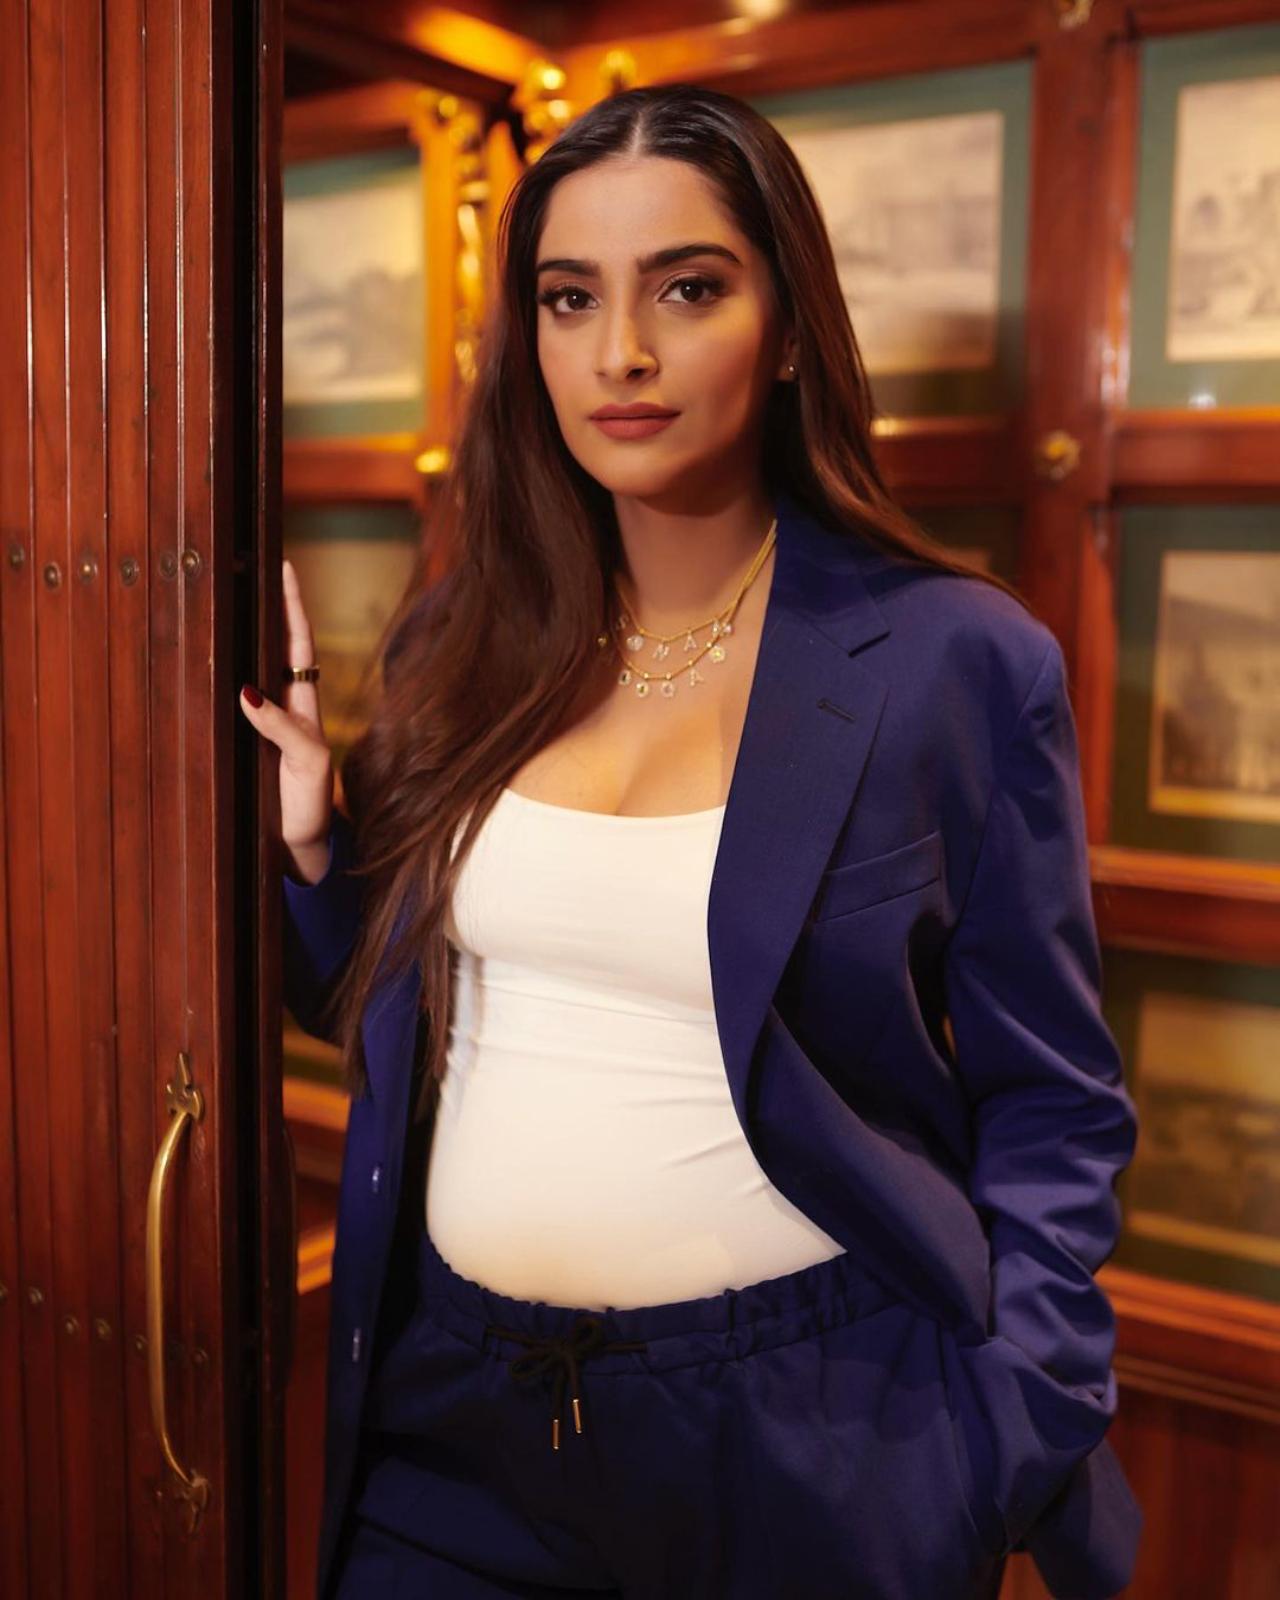 Earlier this year, Sonam announced her pregnancy on Instagram as she wrote: 